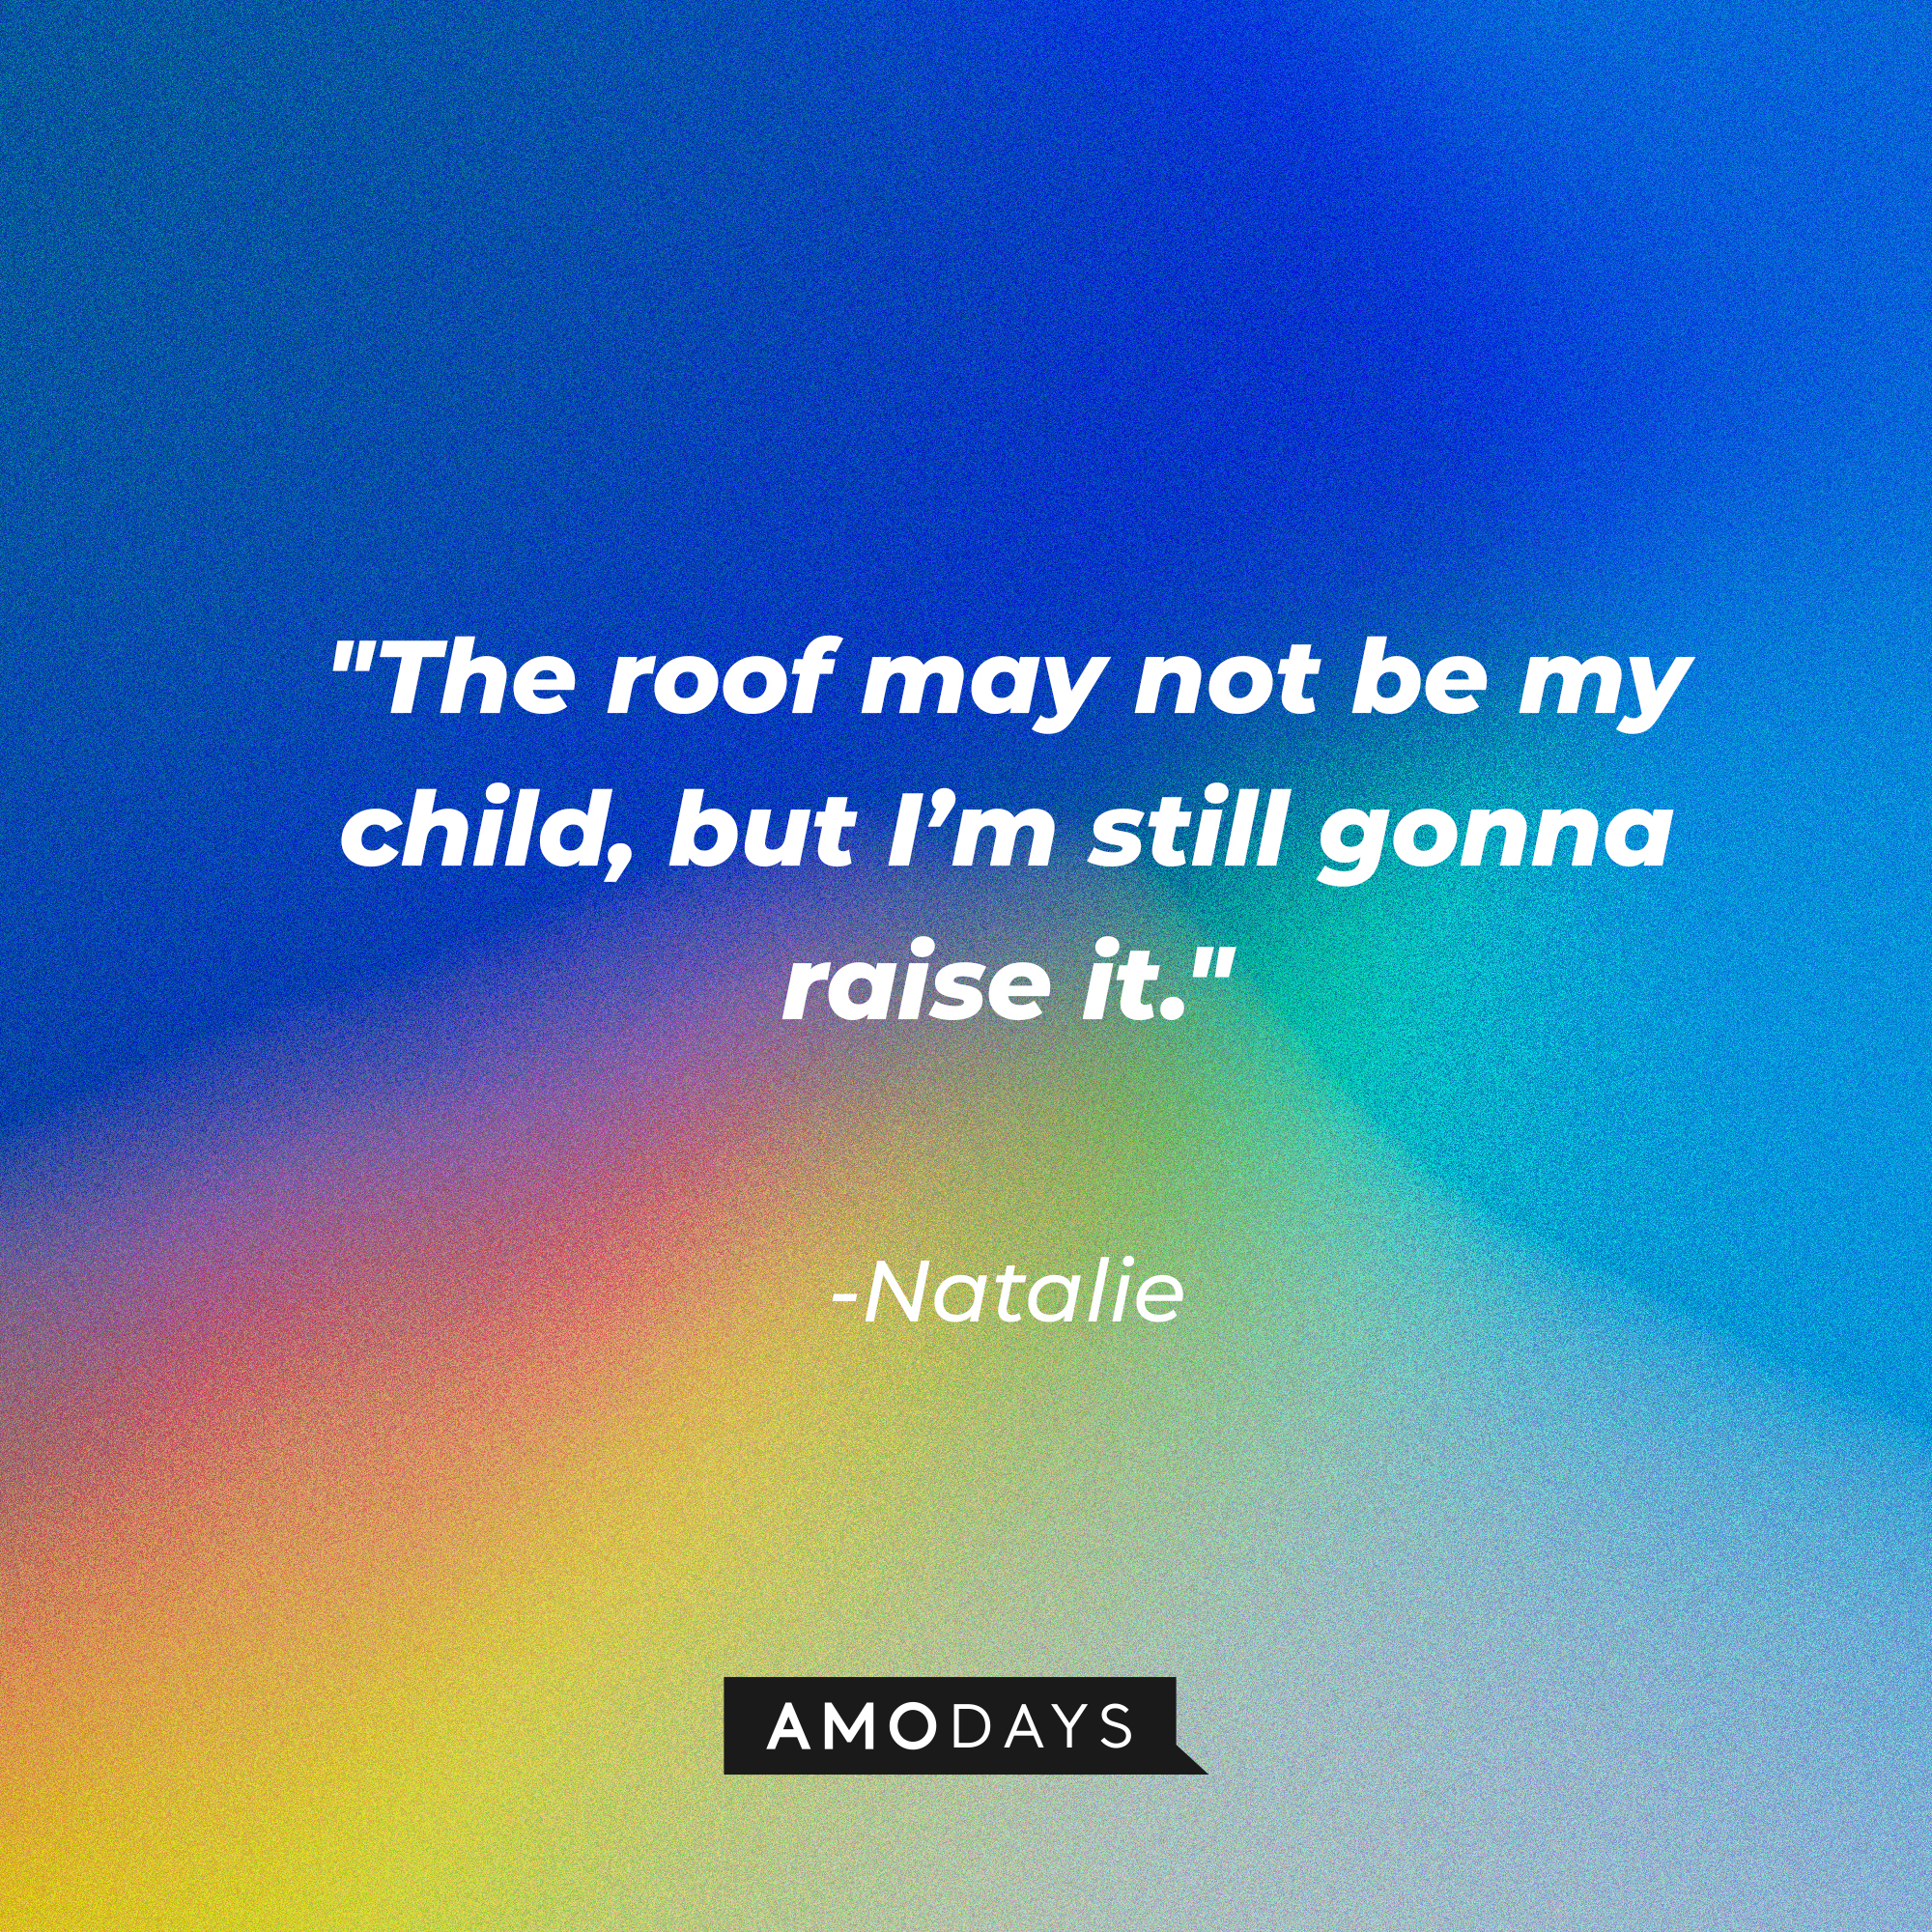 Natalie’s quote: "The roof may not be my child, but I’m still gonna raise it."| Source: AmoDays